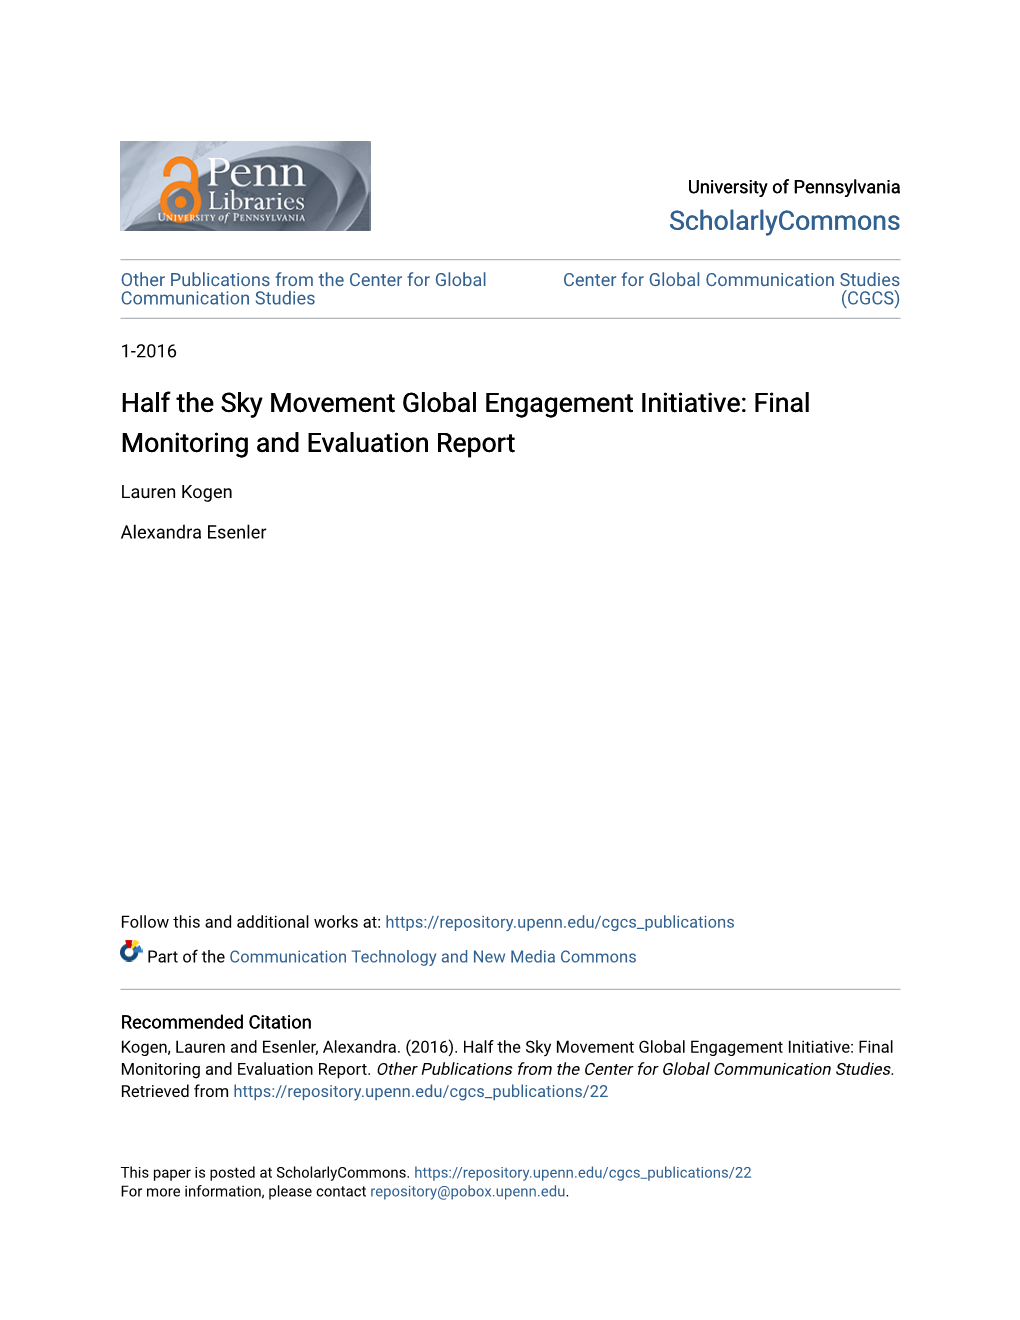 Half the Sky Movement Global Engagement Initiative: Final Monitoring and Evaluation Report